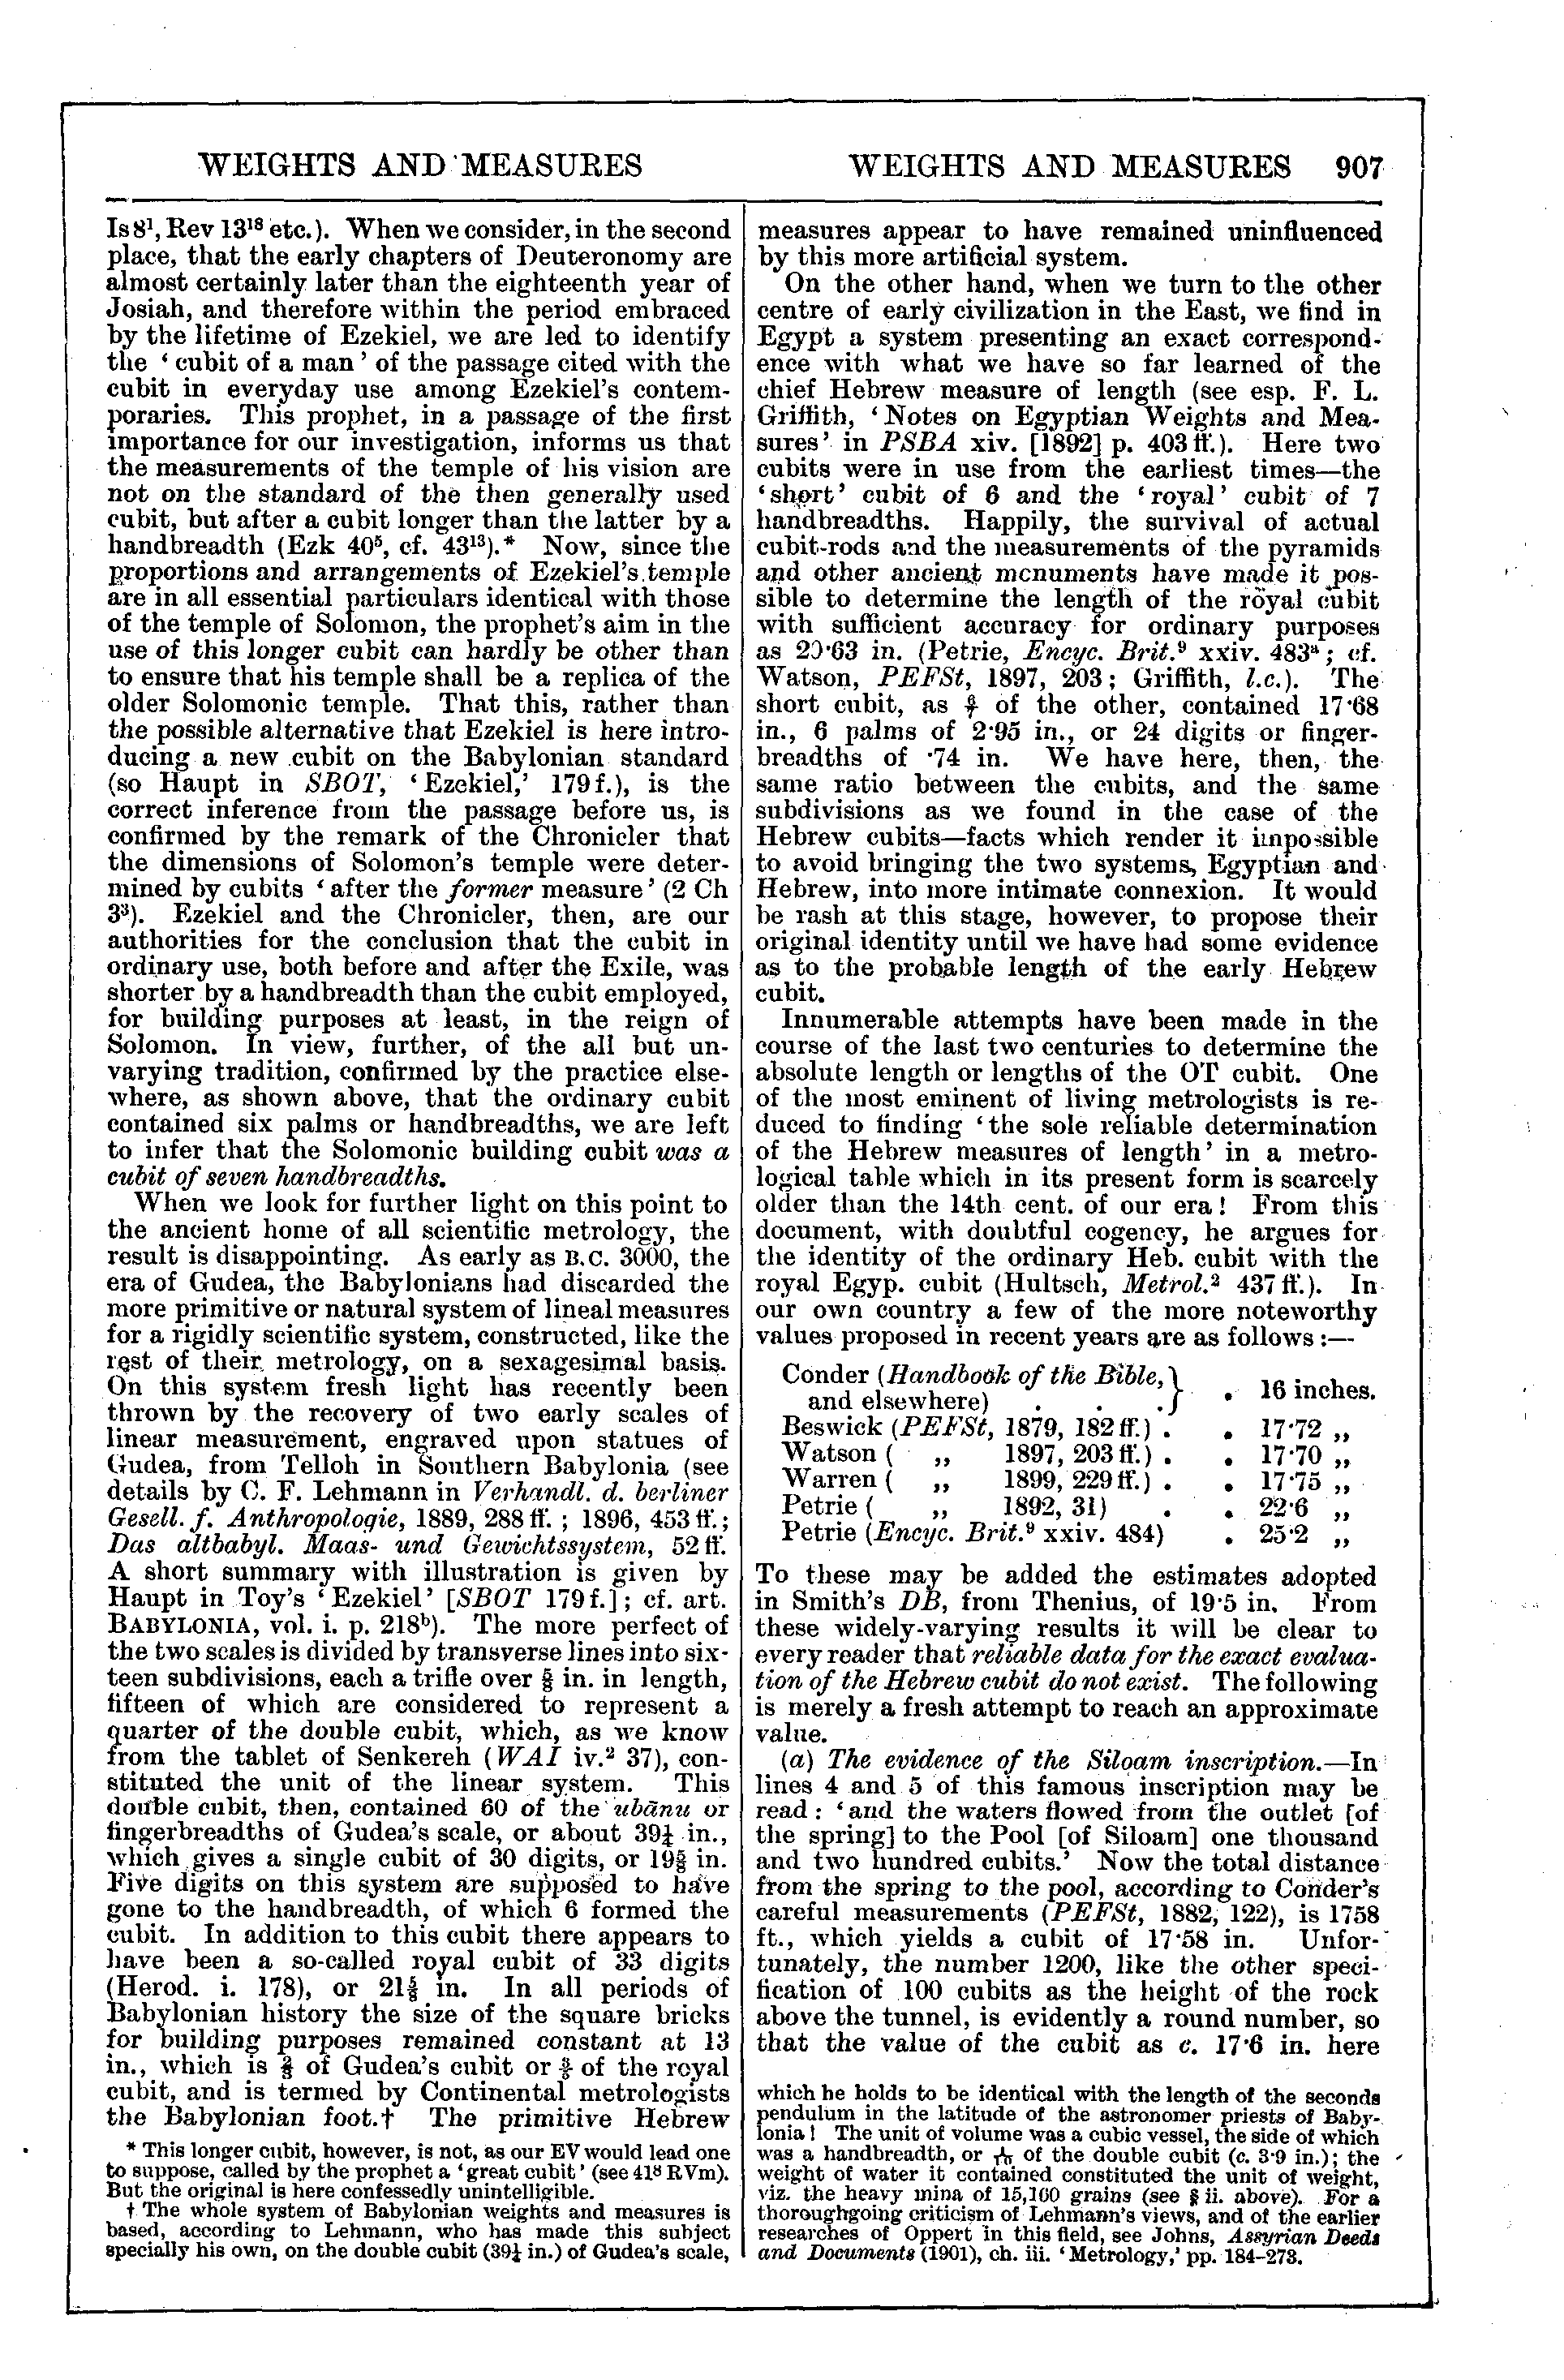 Image of page 907